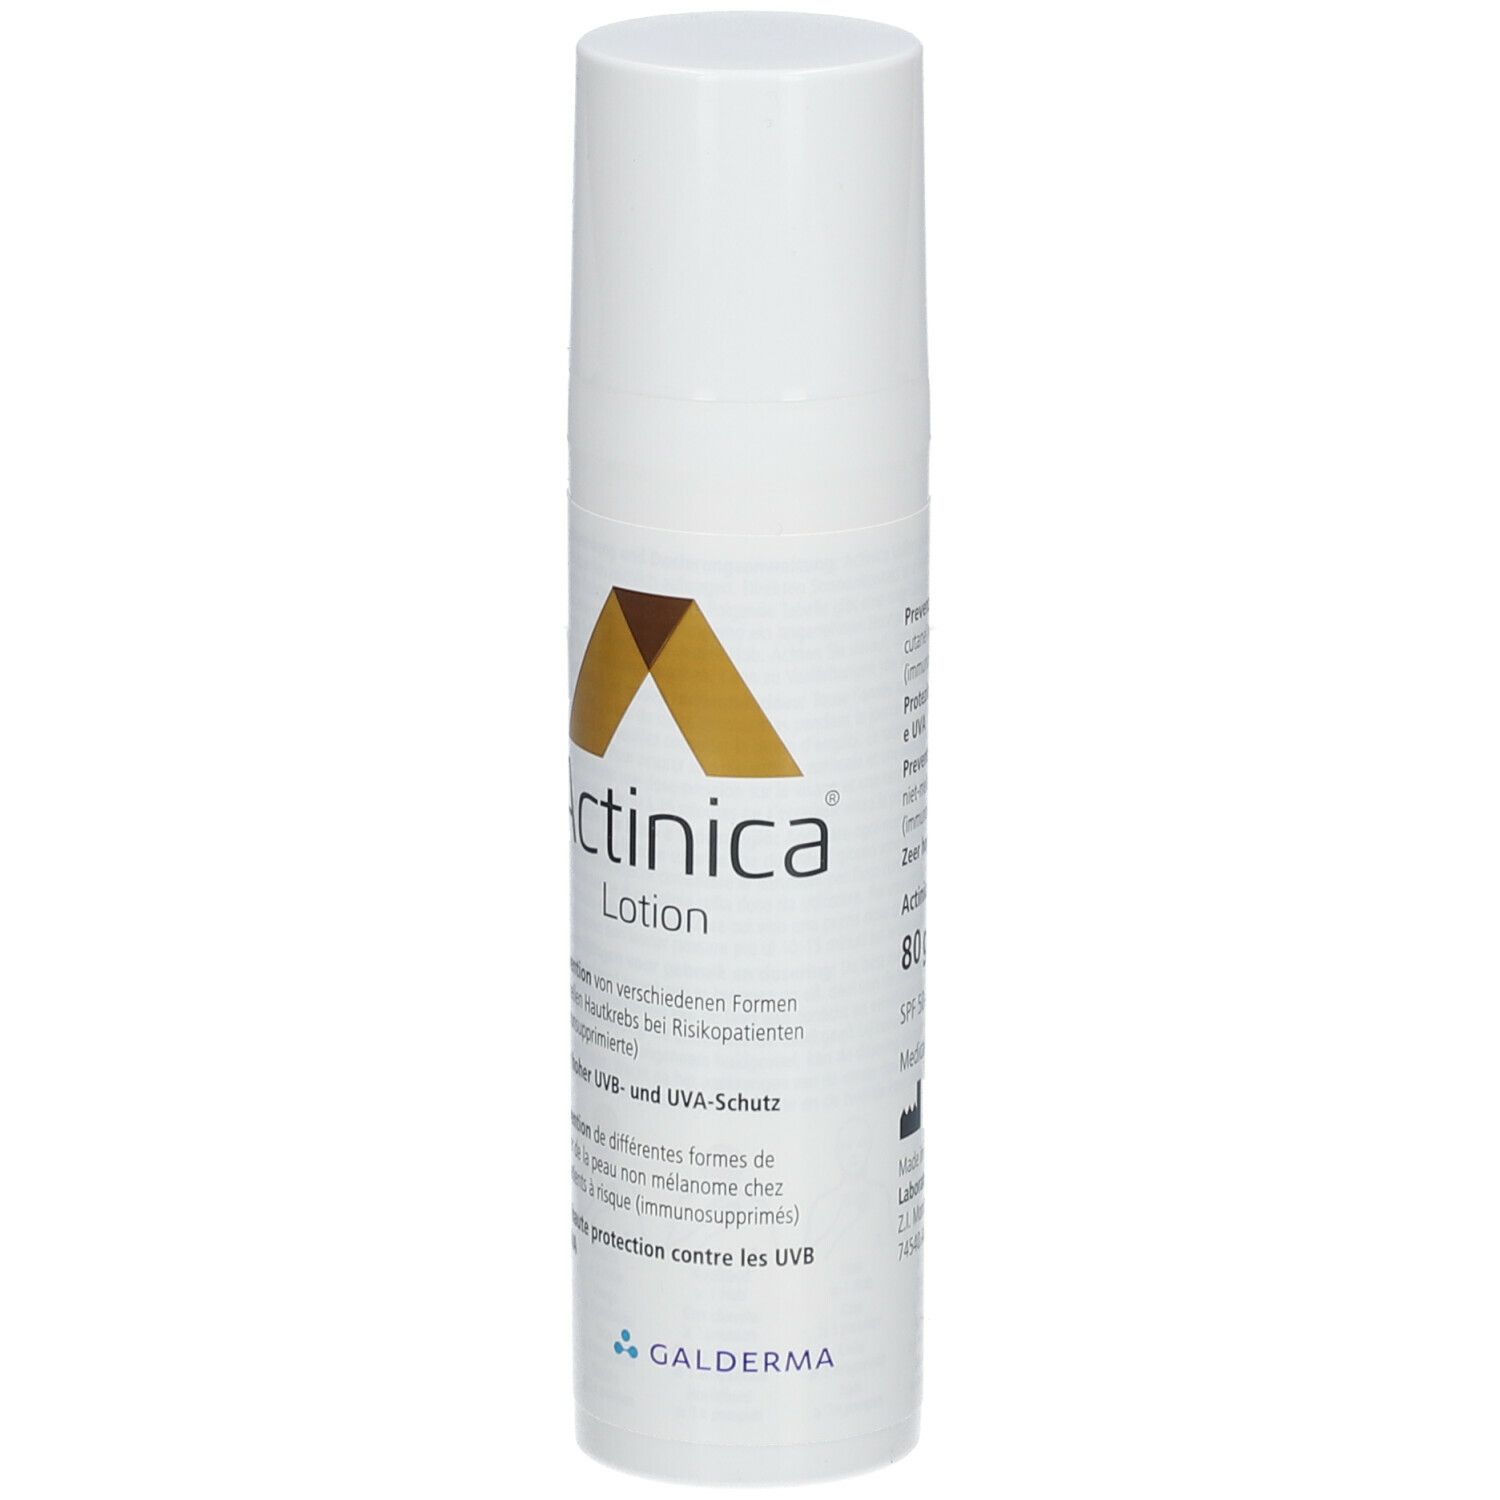 Actinica® Lotion